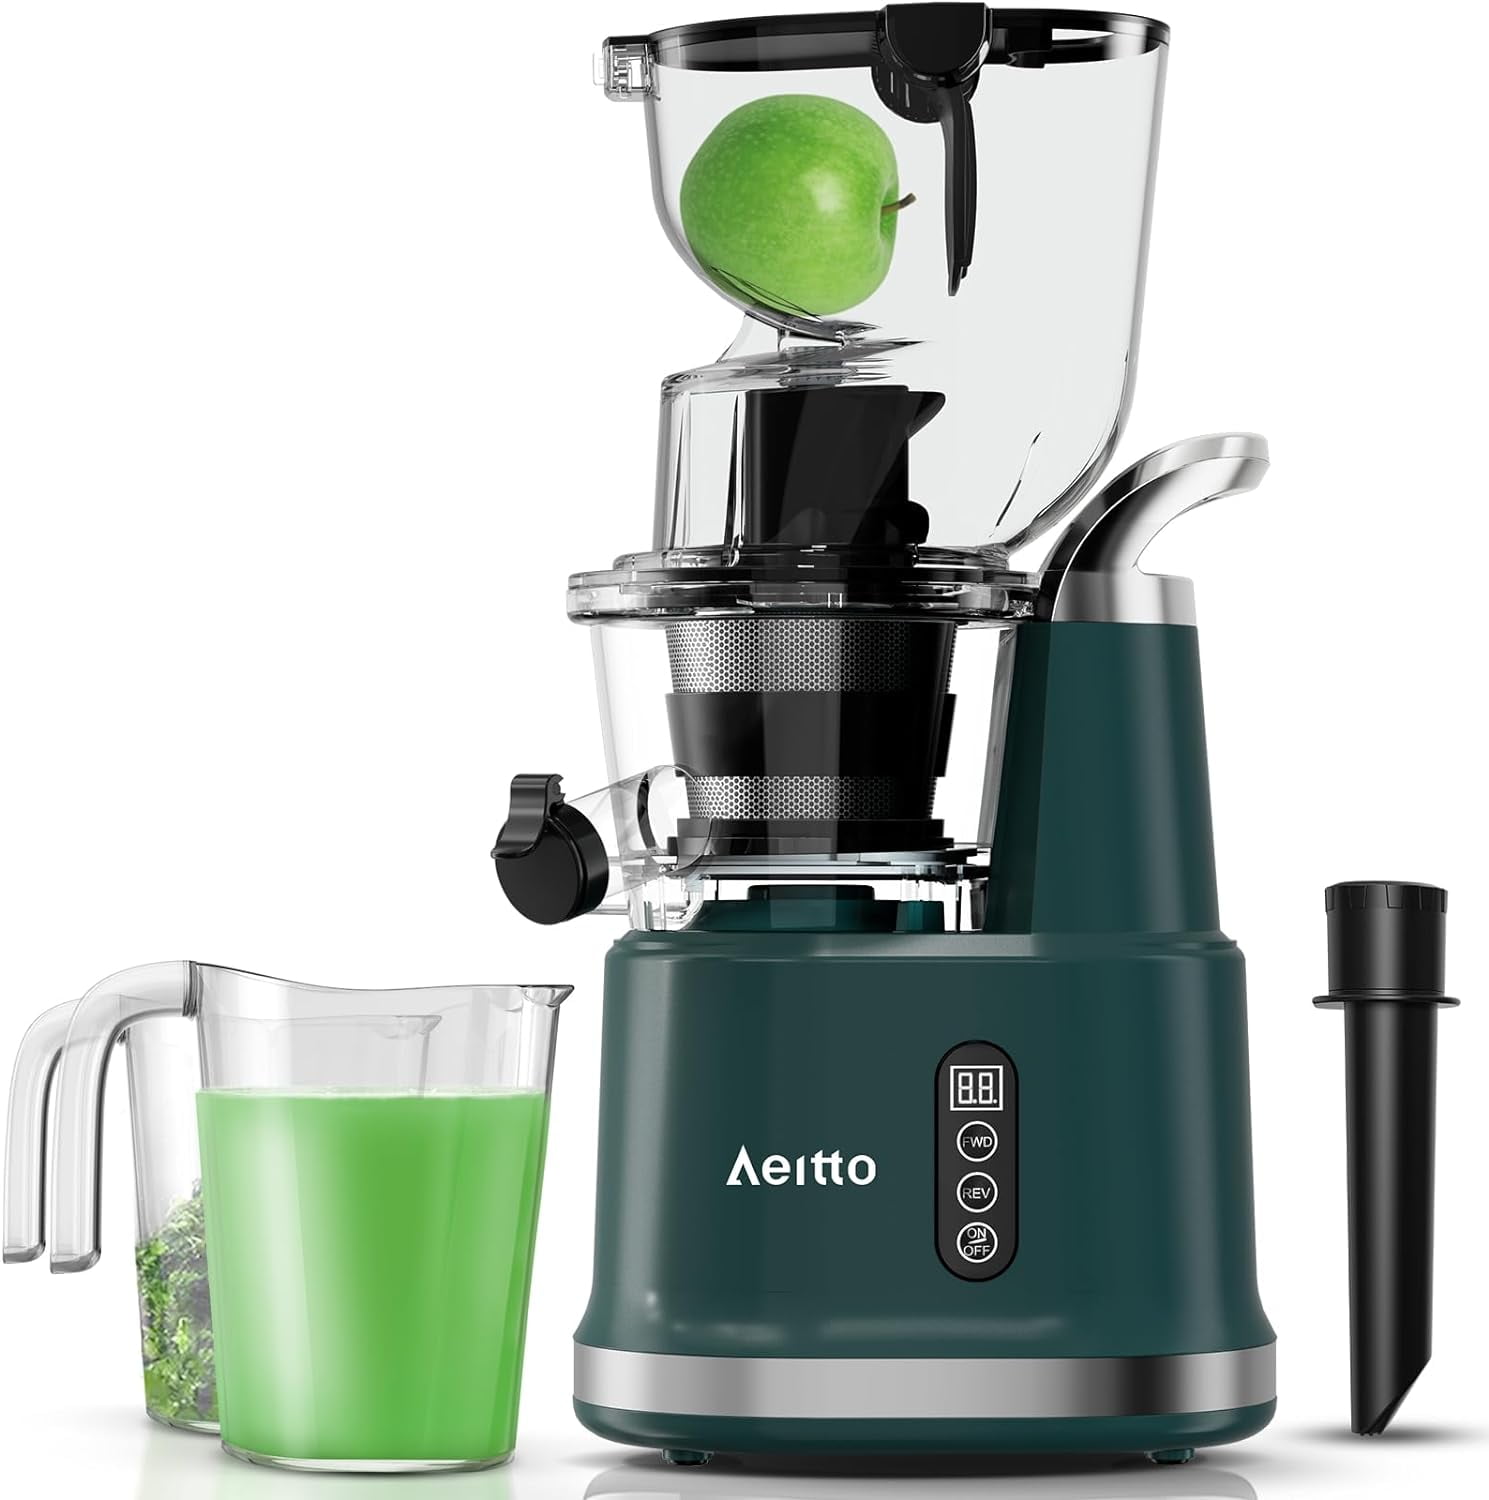 Juicer Machine, Katulan Slow Masticating Juicer, Reverse Function, High  Juice Yield Cold Press Juicer Machine for Fruits and Vegetables, Green